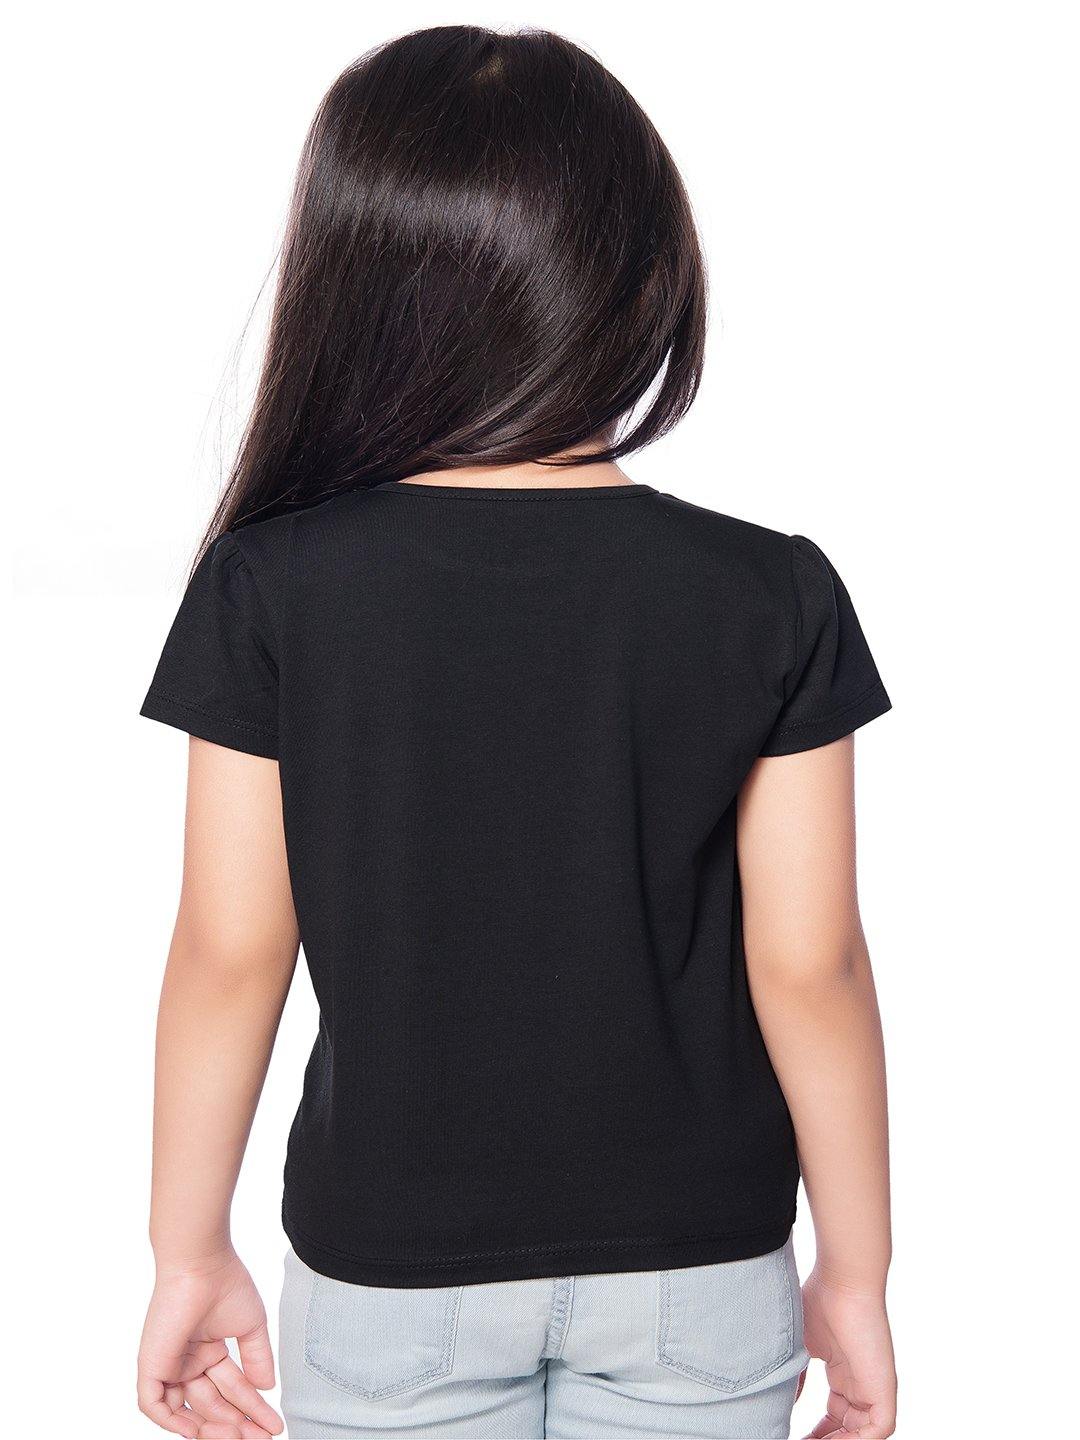 Tiny Baby Black Colored Top - T-107 Black - TINY BABY INDIA shop.tinybaby.in